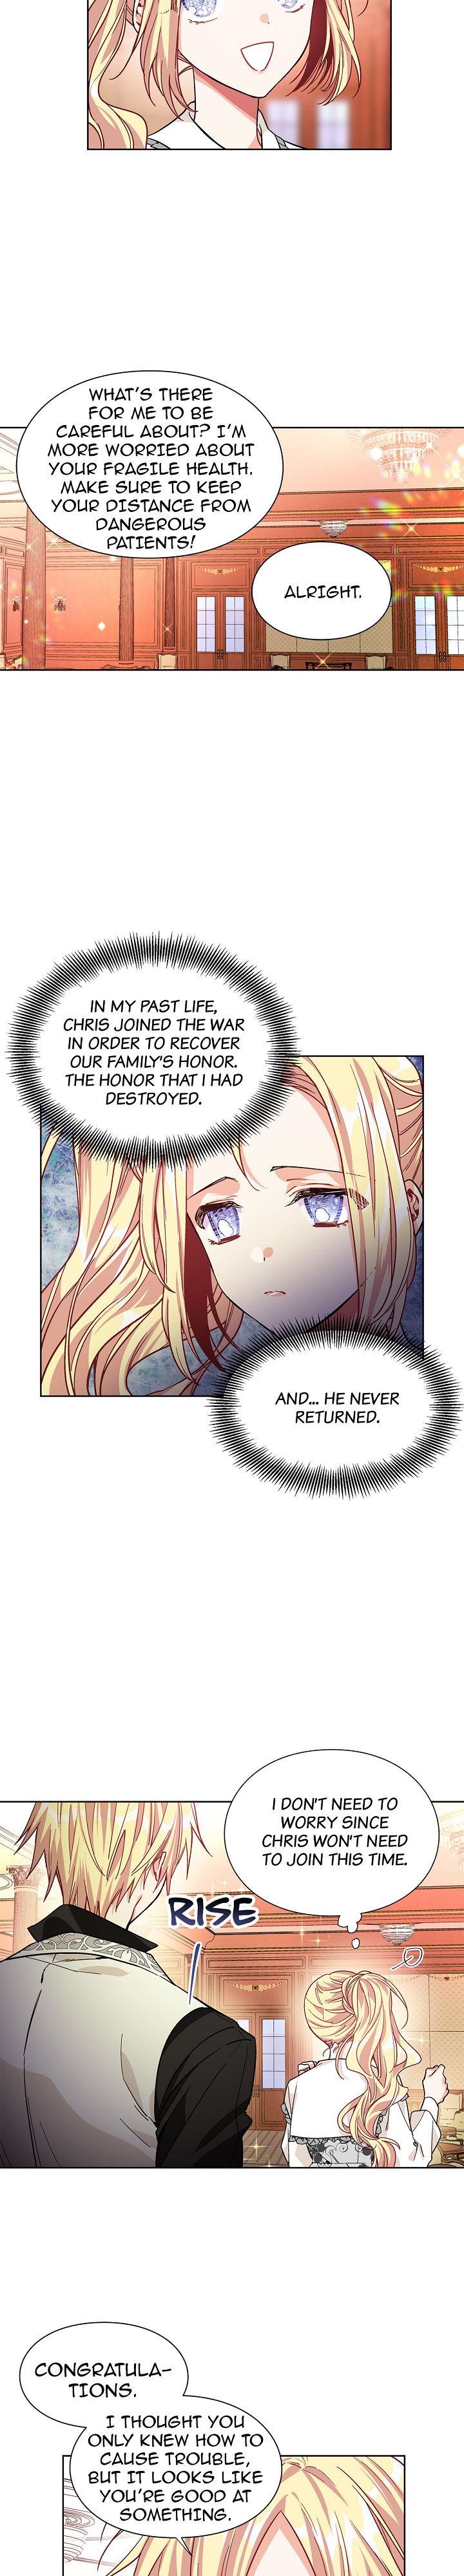 Doctor Elise - The Royal Lady with the Lamp - Chapter 41 Page 6